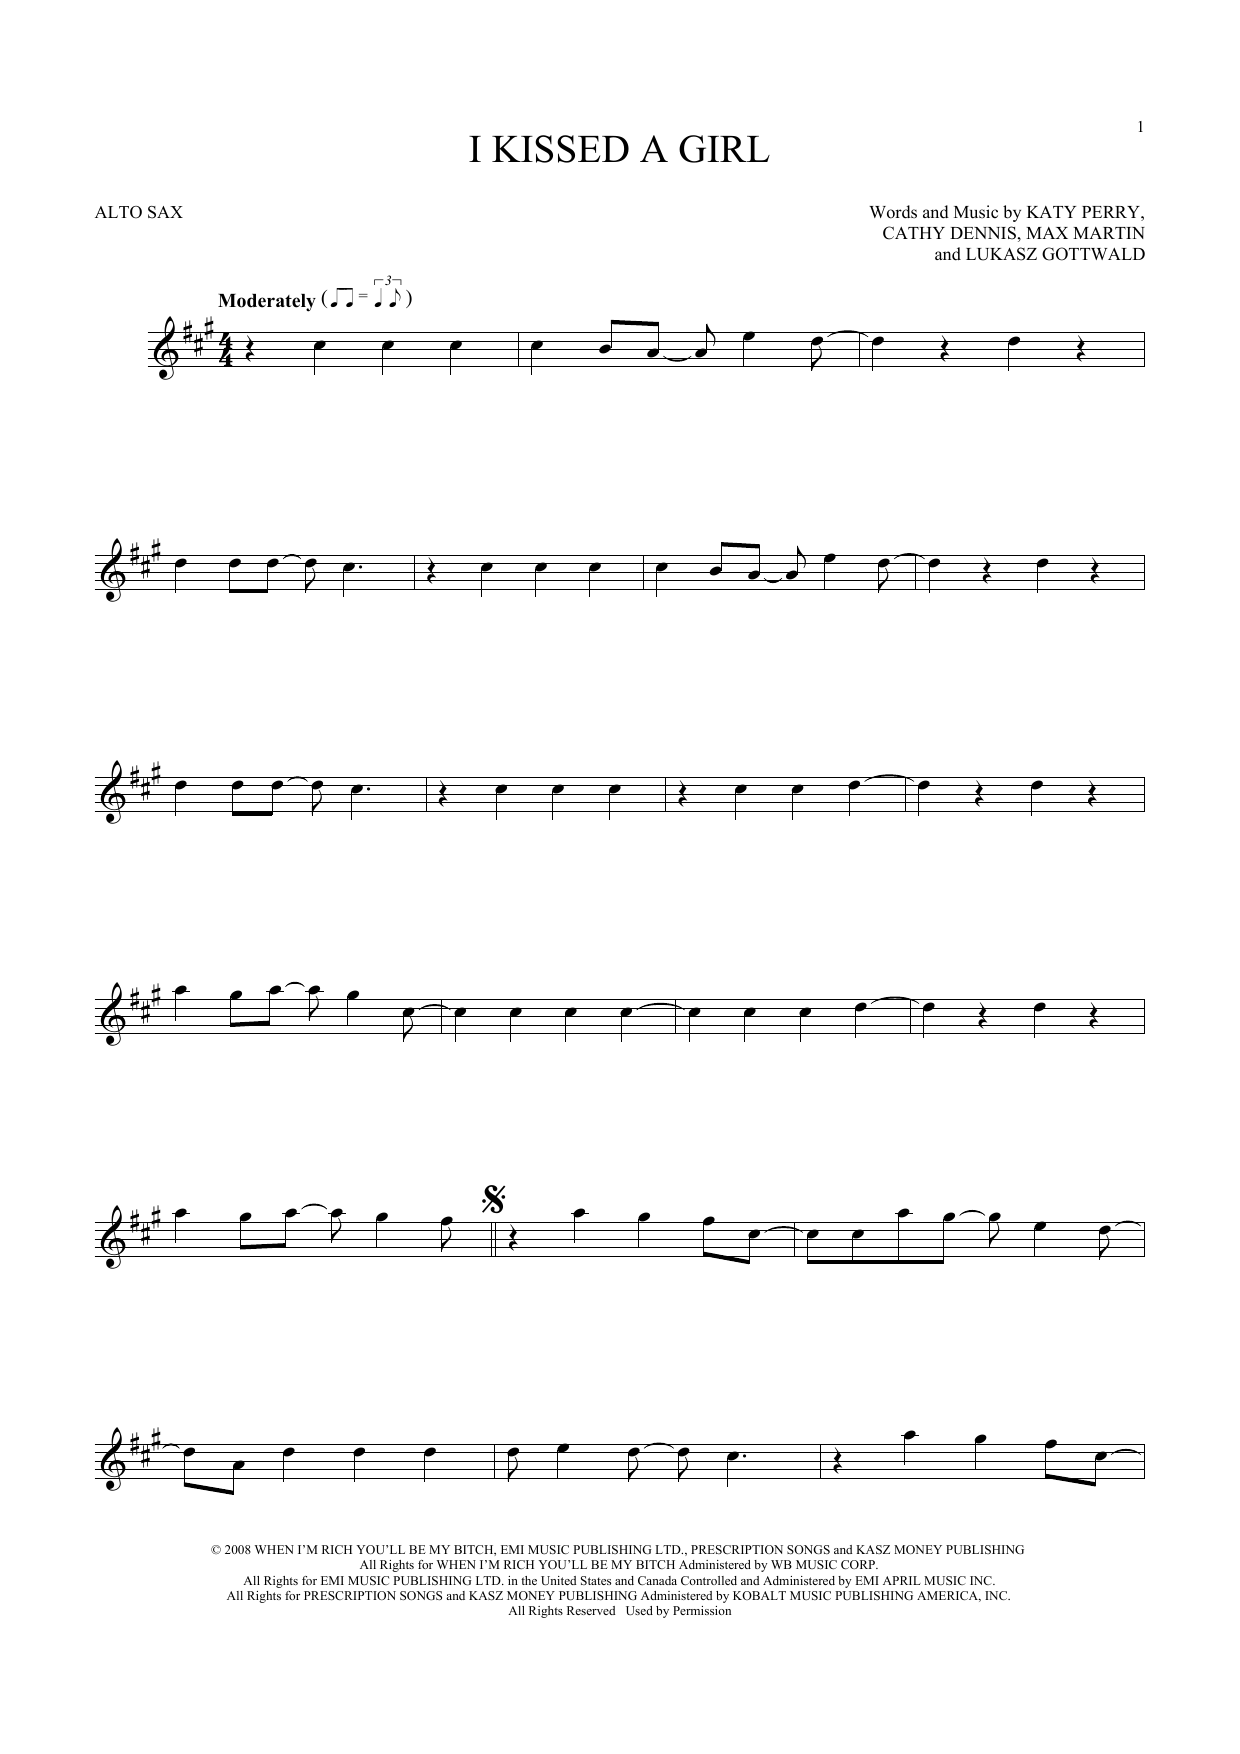 Download Katy Perry I Kissed A Girl Sheet Music